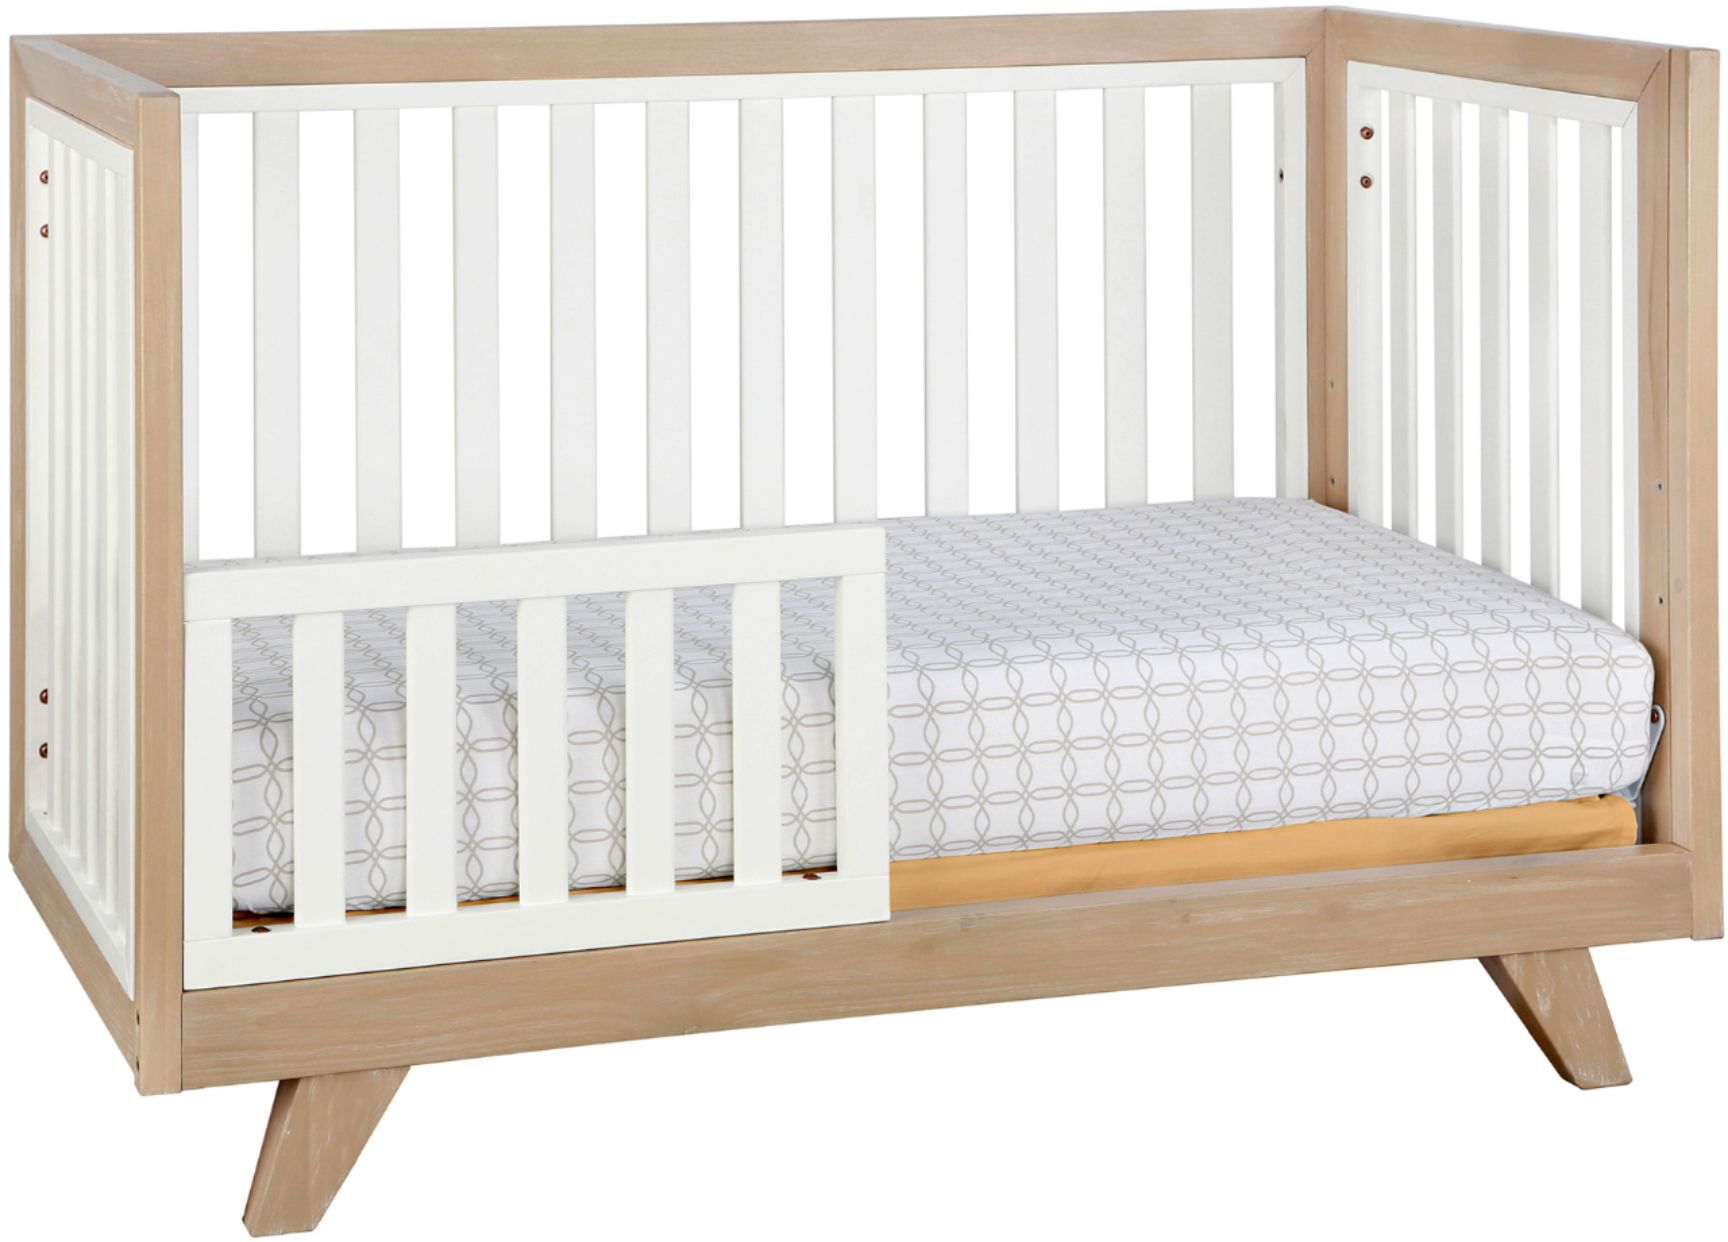 Left View: Second Story Home Wooster 3-in-1 Convertible Crib, Almond